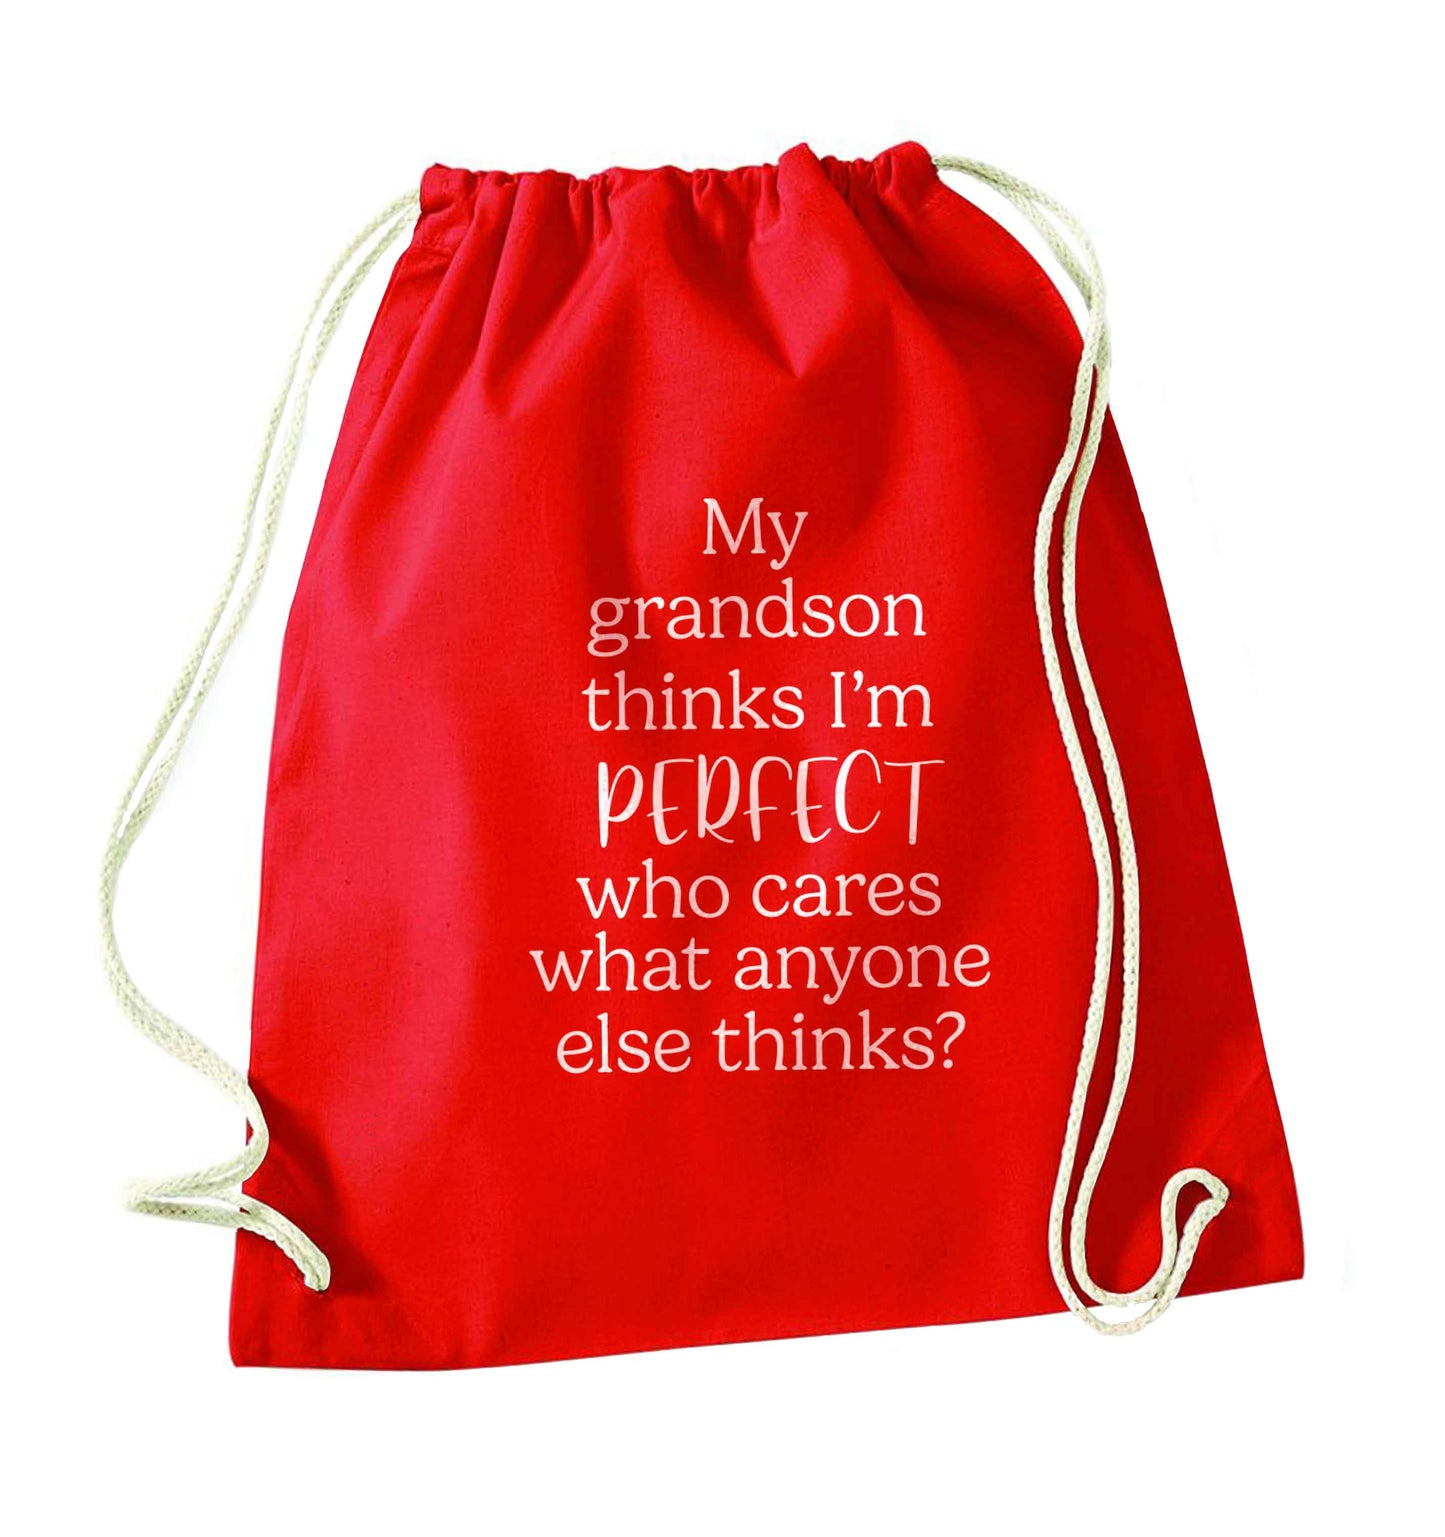 My Grandson thinks I'm perfect who cares what anyone else thinks? red drawstring bag 